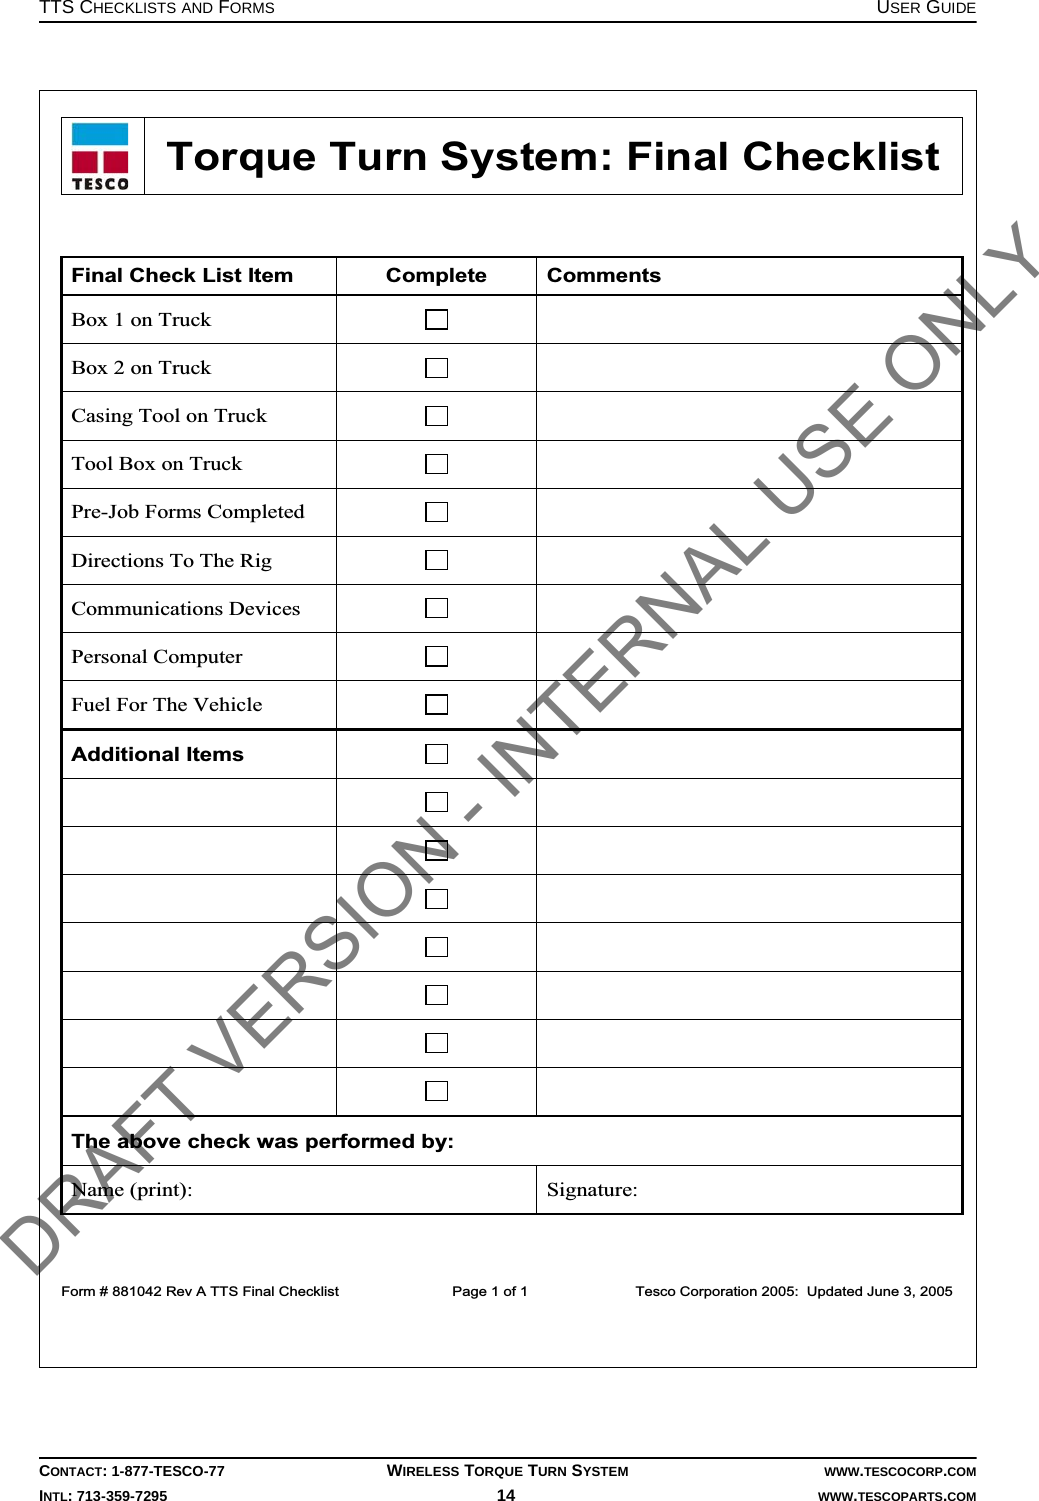 TTS CHECKLISTS AND FORMS USER GUIDECONTACT: 1-877-TESCO-77 WIRELESS TORQUE TURN SYSTEM WWW.TESCOCORP.COMINTL: 713-359-7295 14    WWW.TESCOPARTS.COM Torque Turn System: Final Checklist Form # 881042 Rev A TTS Final Checklist                Page 1 of 1                          Tesco Corporation 2005:  Updated June 3, 2005   Final Check List Item  Complete  Comments Box 1 on Truck    Box 2 on Truck    Casing Tool on Truck    Tool Box on Truck    Pre-Job Forms Completed    Directions To The Rig    Communications Devices    Personal Computer    Fuel For The Vehicle    Additional Items                         The above check was performed by: Name (print):  Signature:  DRAFT VERSION - INTERNAL USE ONLY